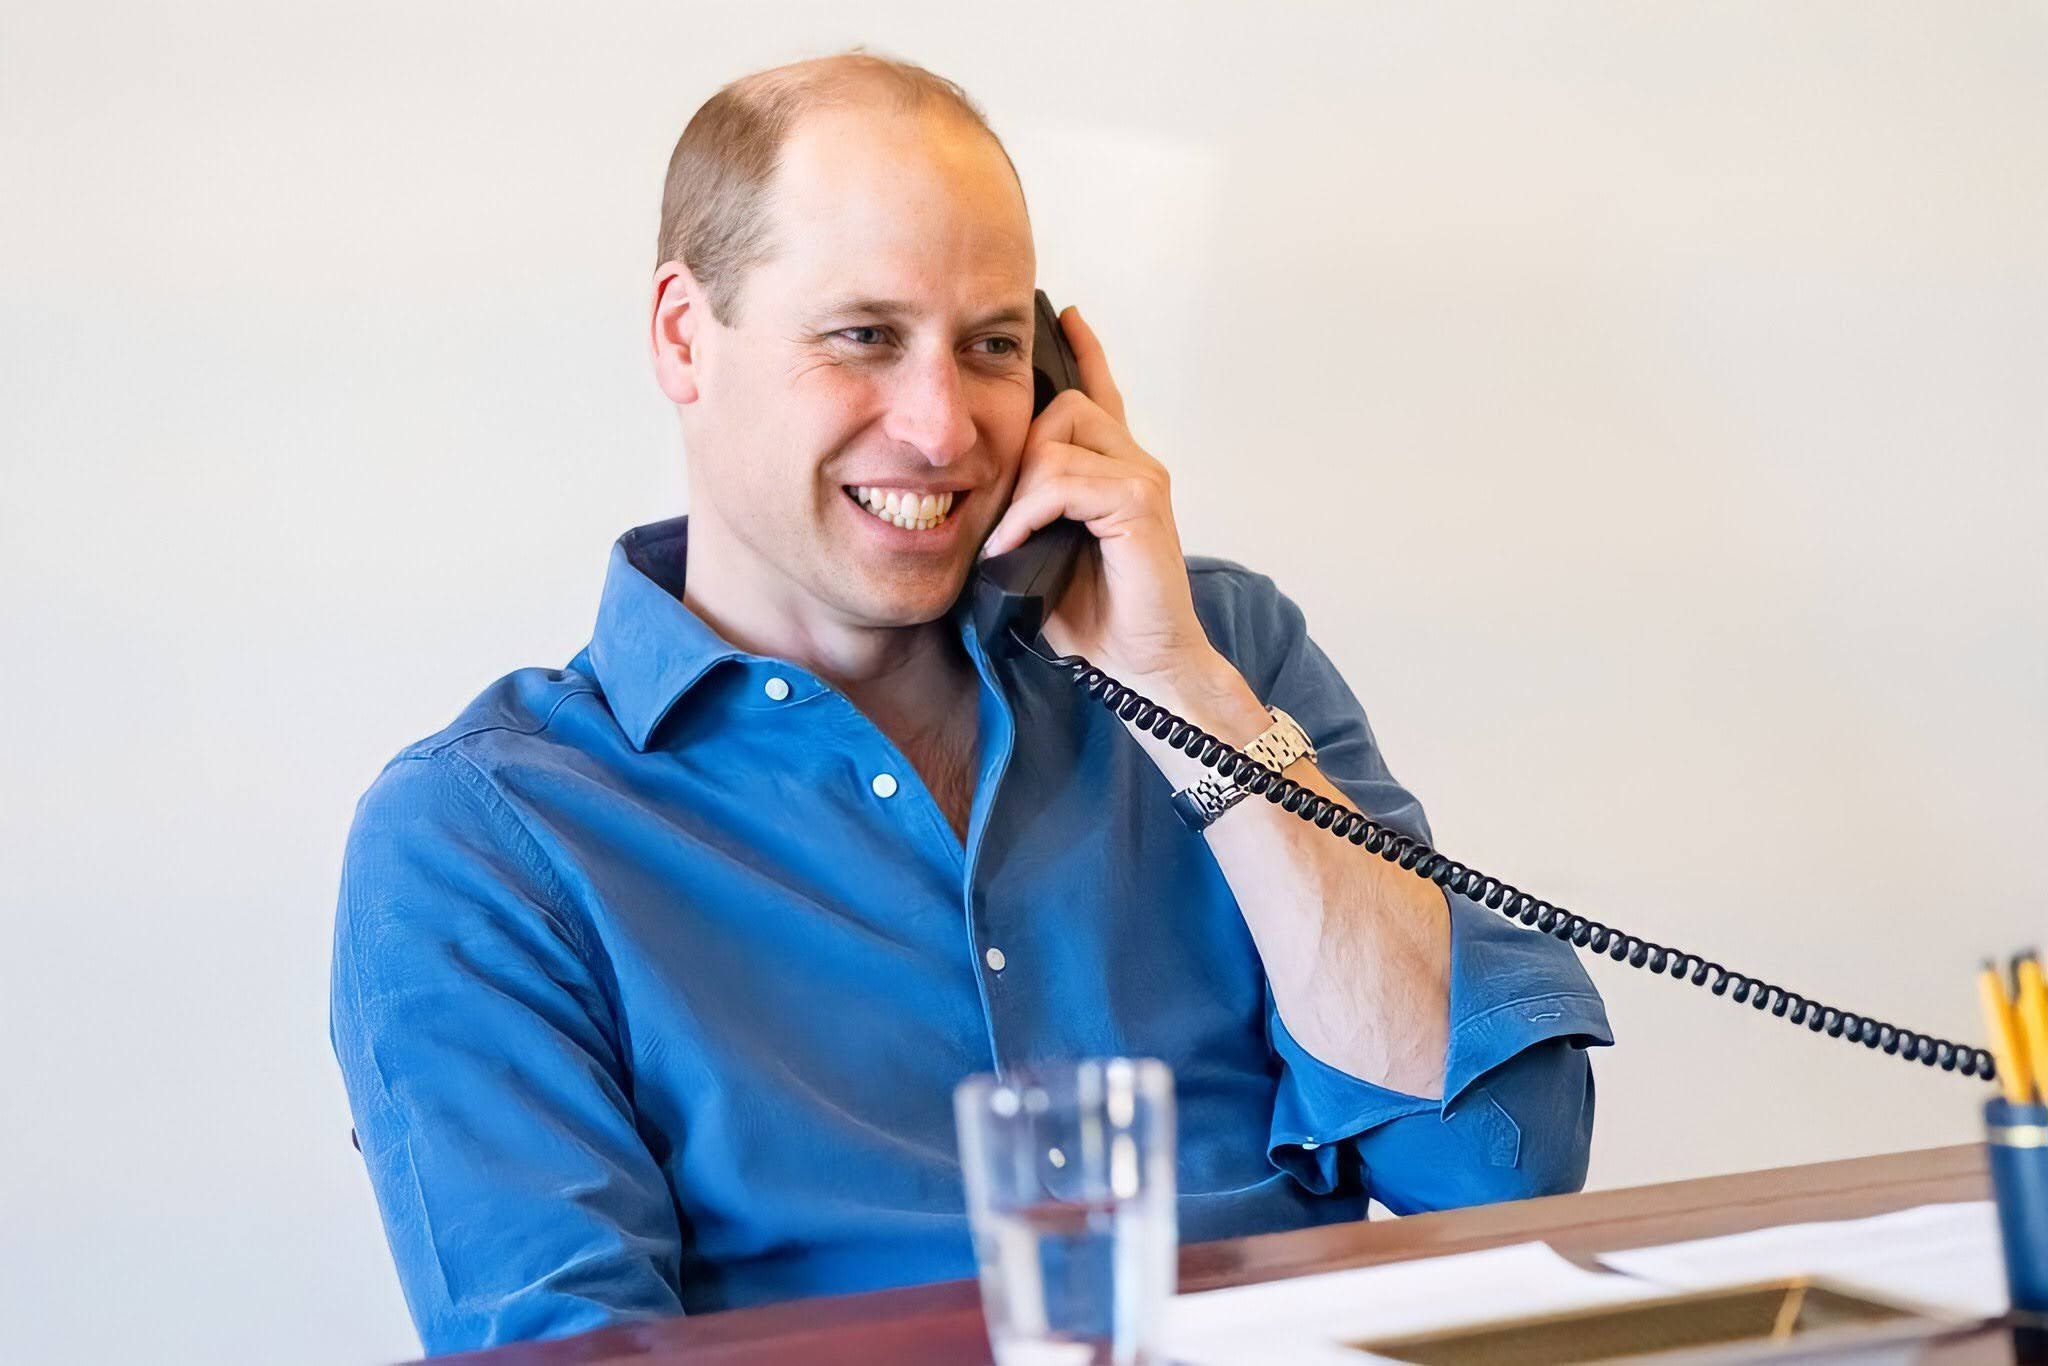 The Duke of Cambridge speaks on the phone to members of the NHS’s workforce